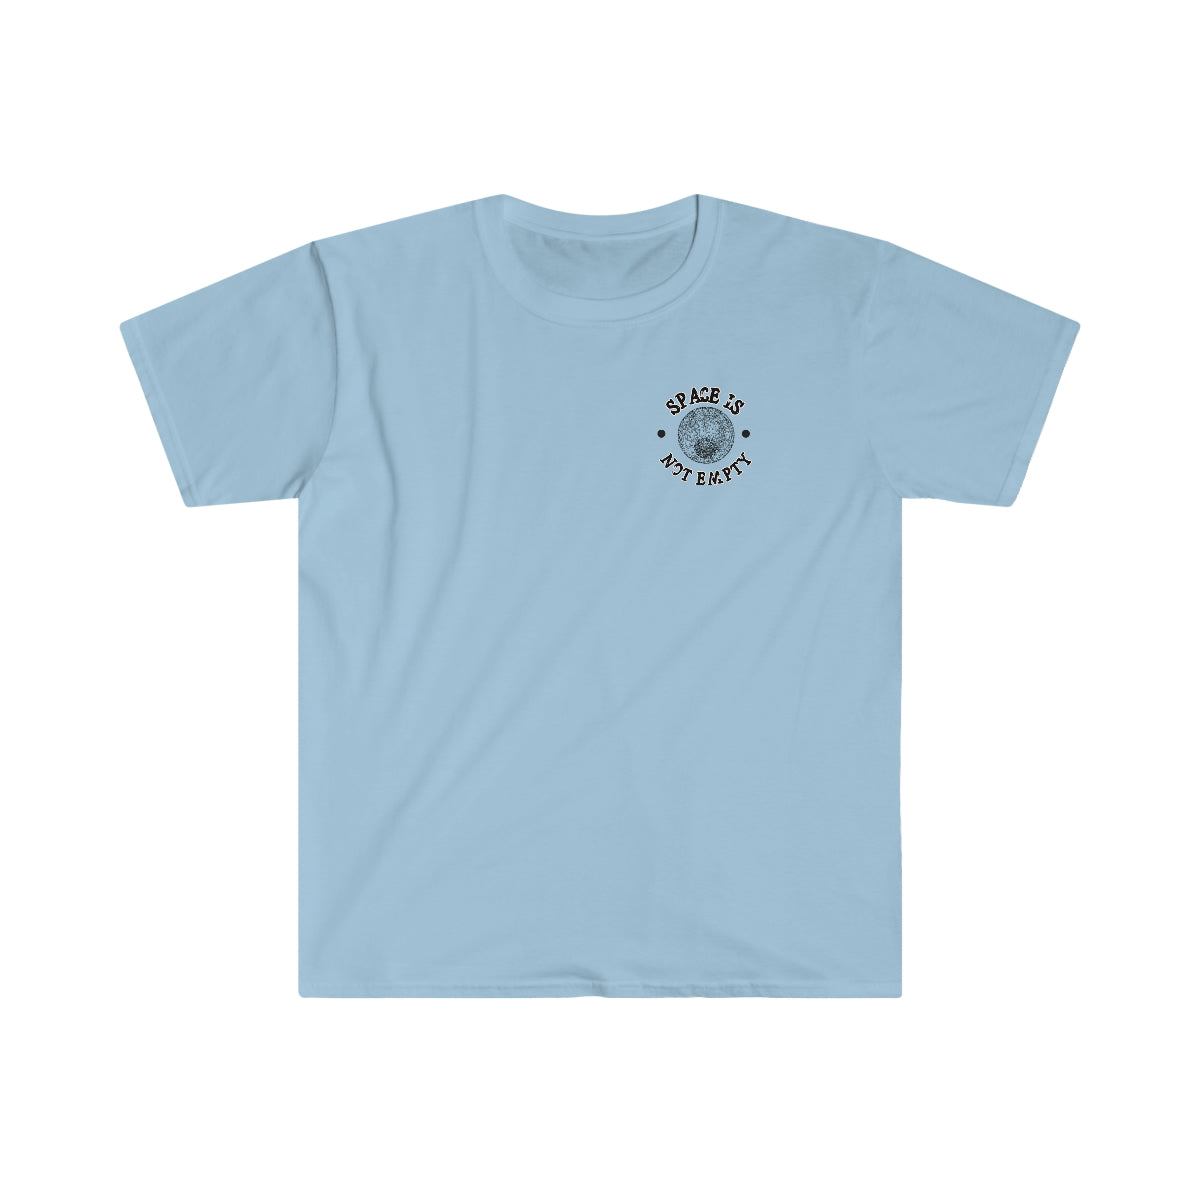 A light blue cotton Spherical Angles T-Shirt with a circle on it.